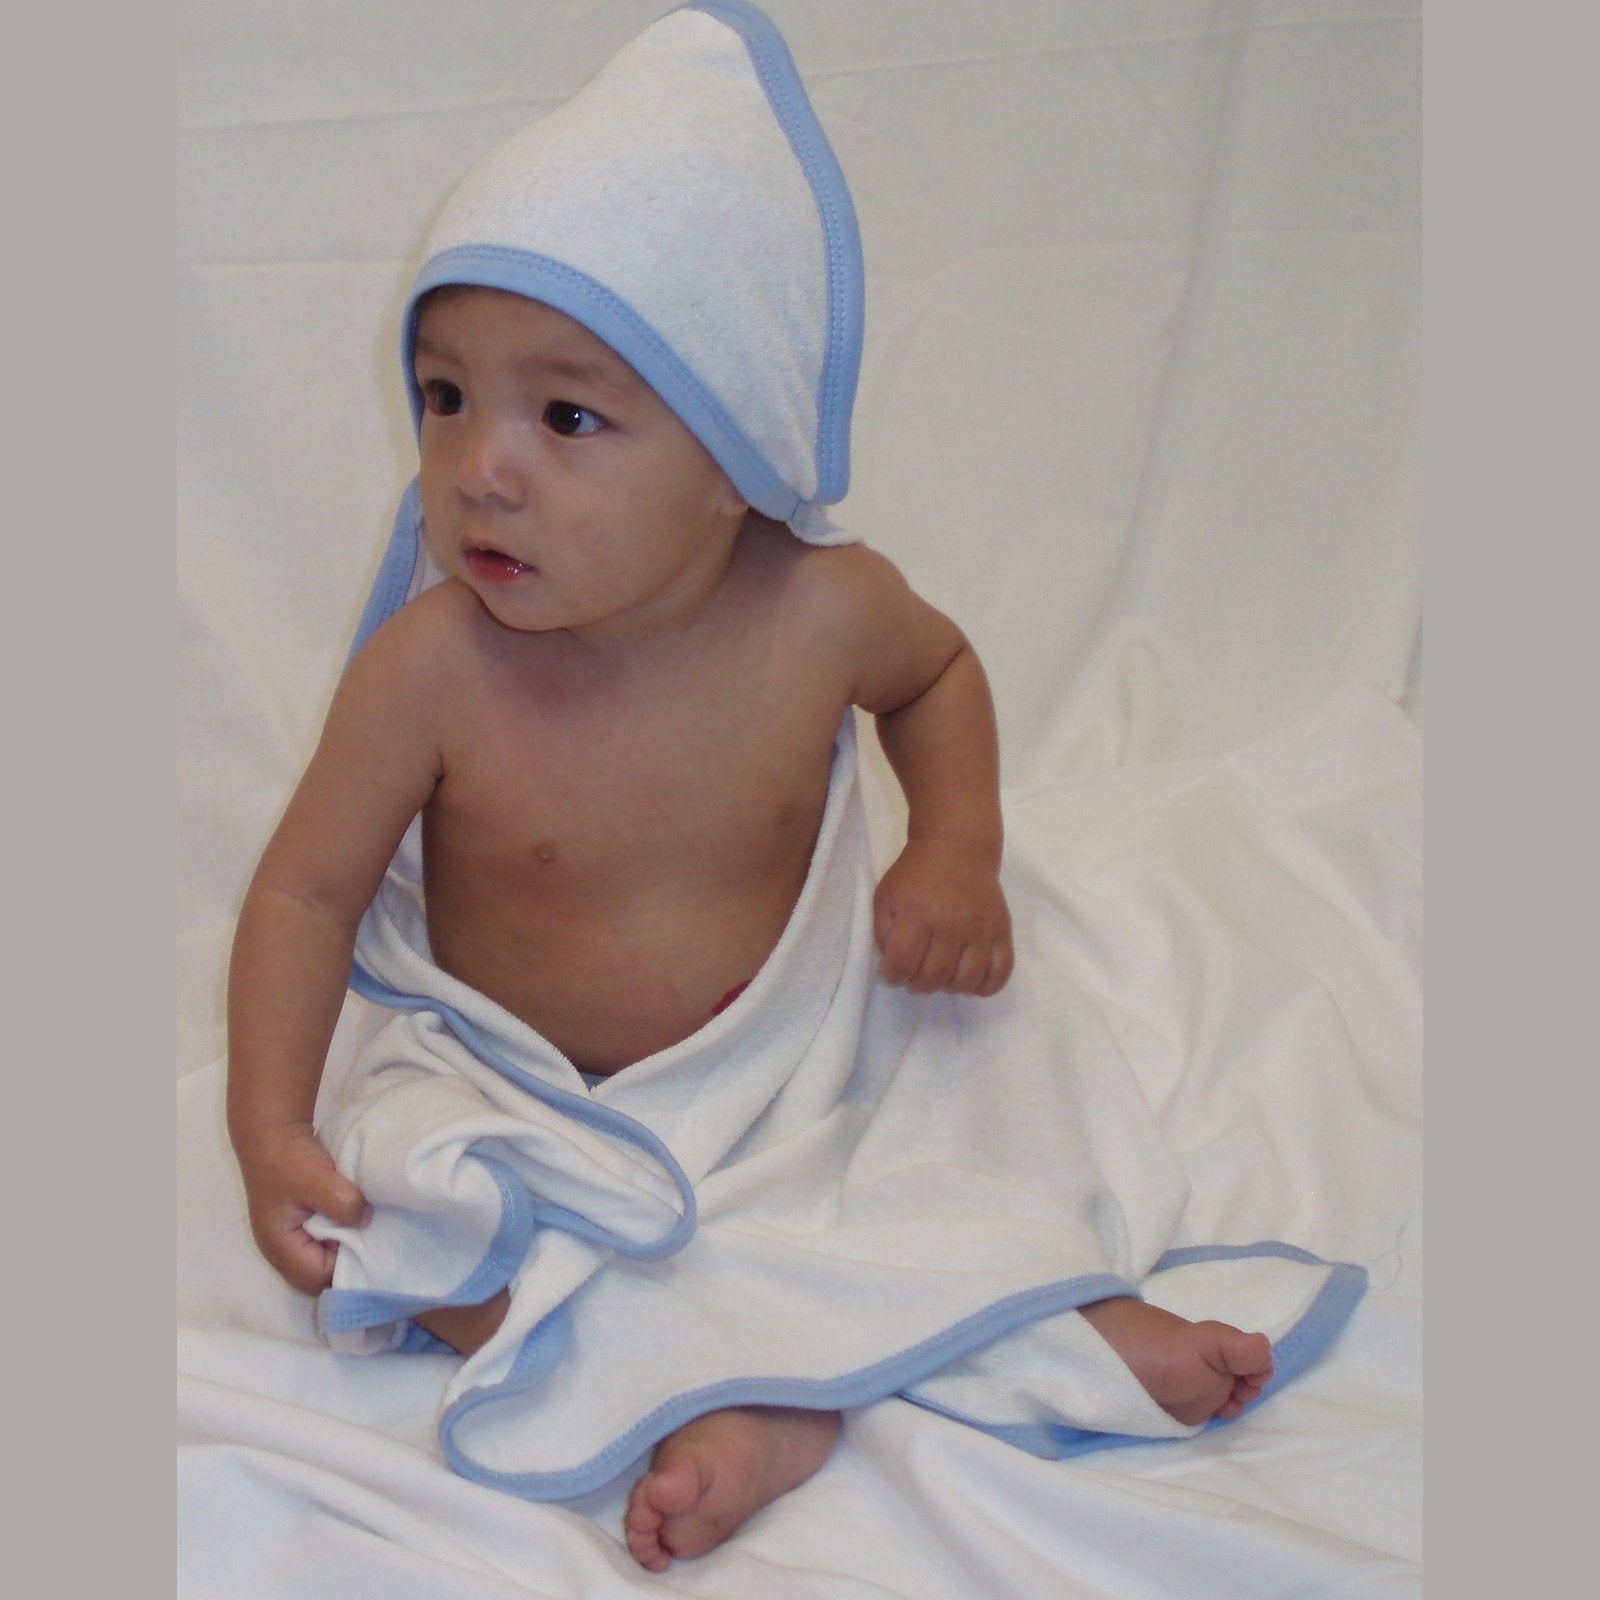 Bambini Hooded Towel with Blue Binding and Screen Prints